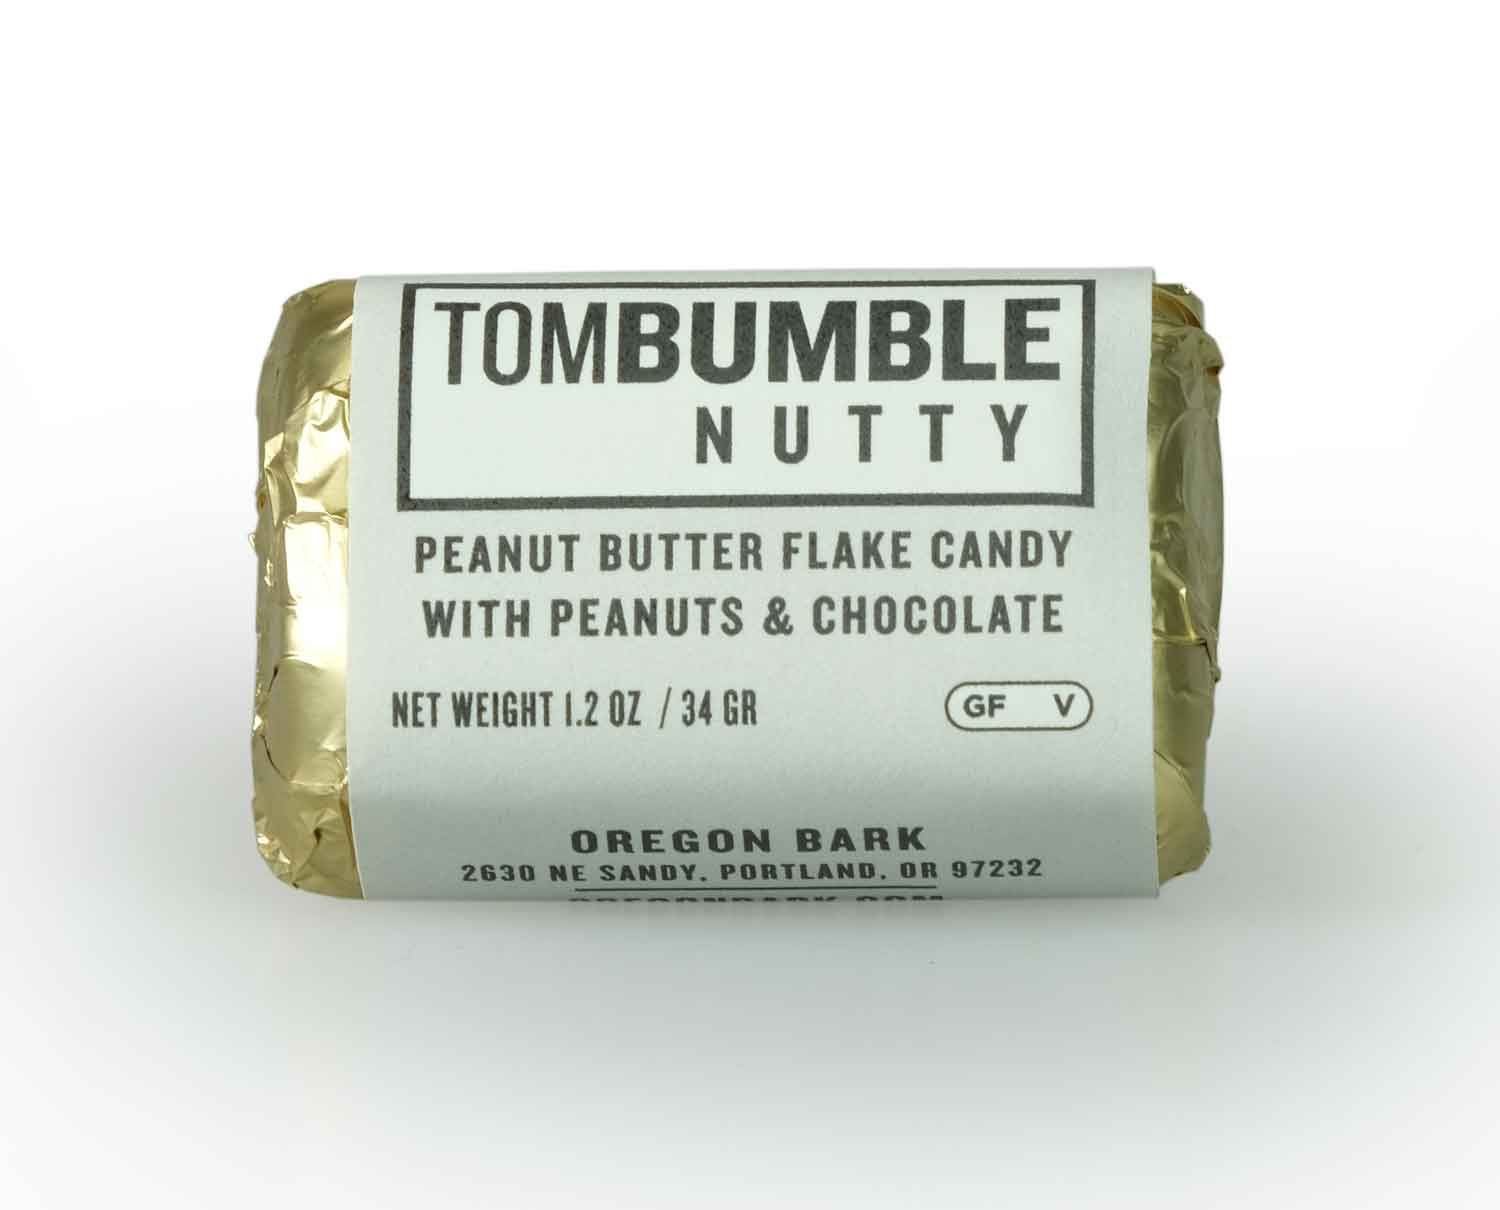 Tom Bumble Nutty Chocolate Covered Peanut Butter Flake Candy Caputo's Market & Deli